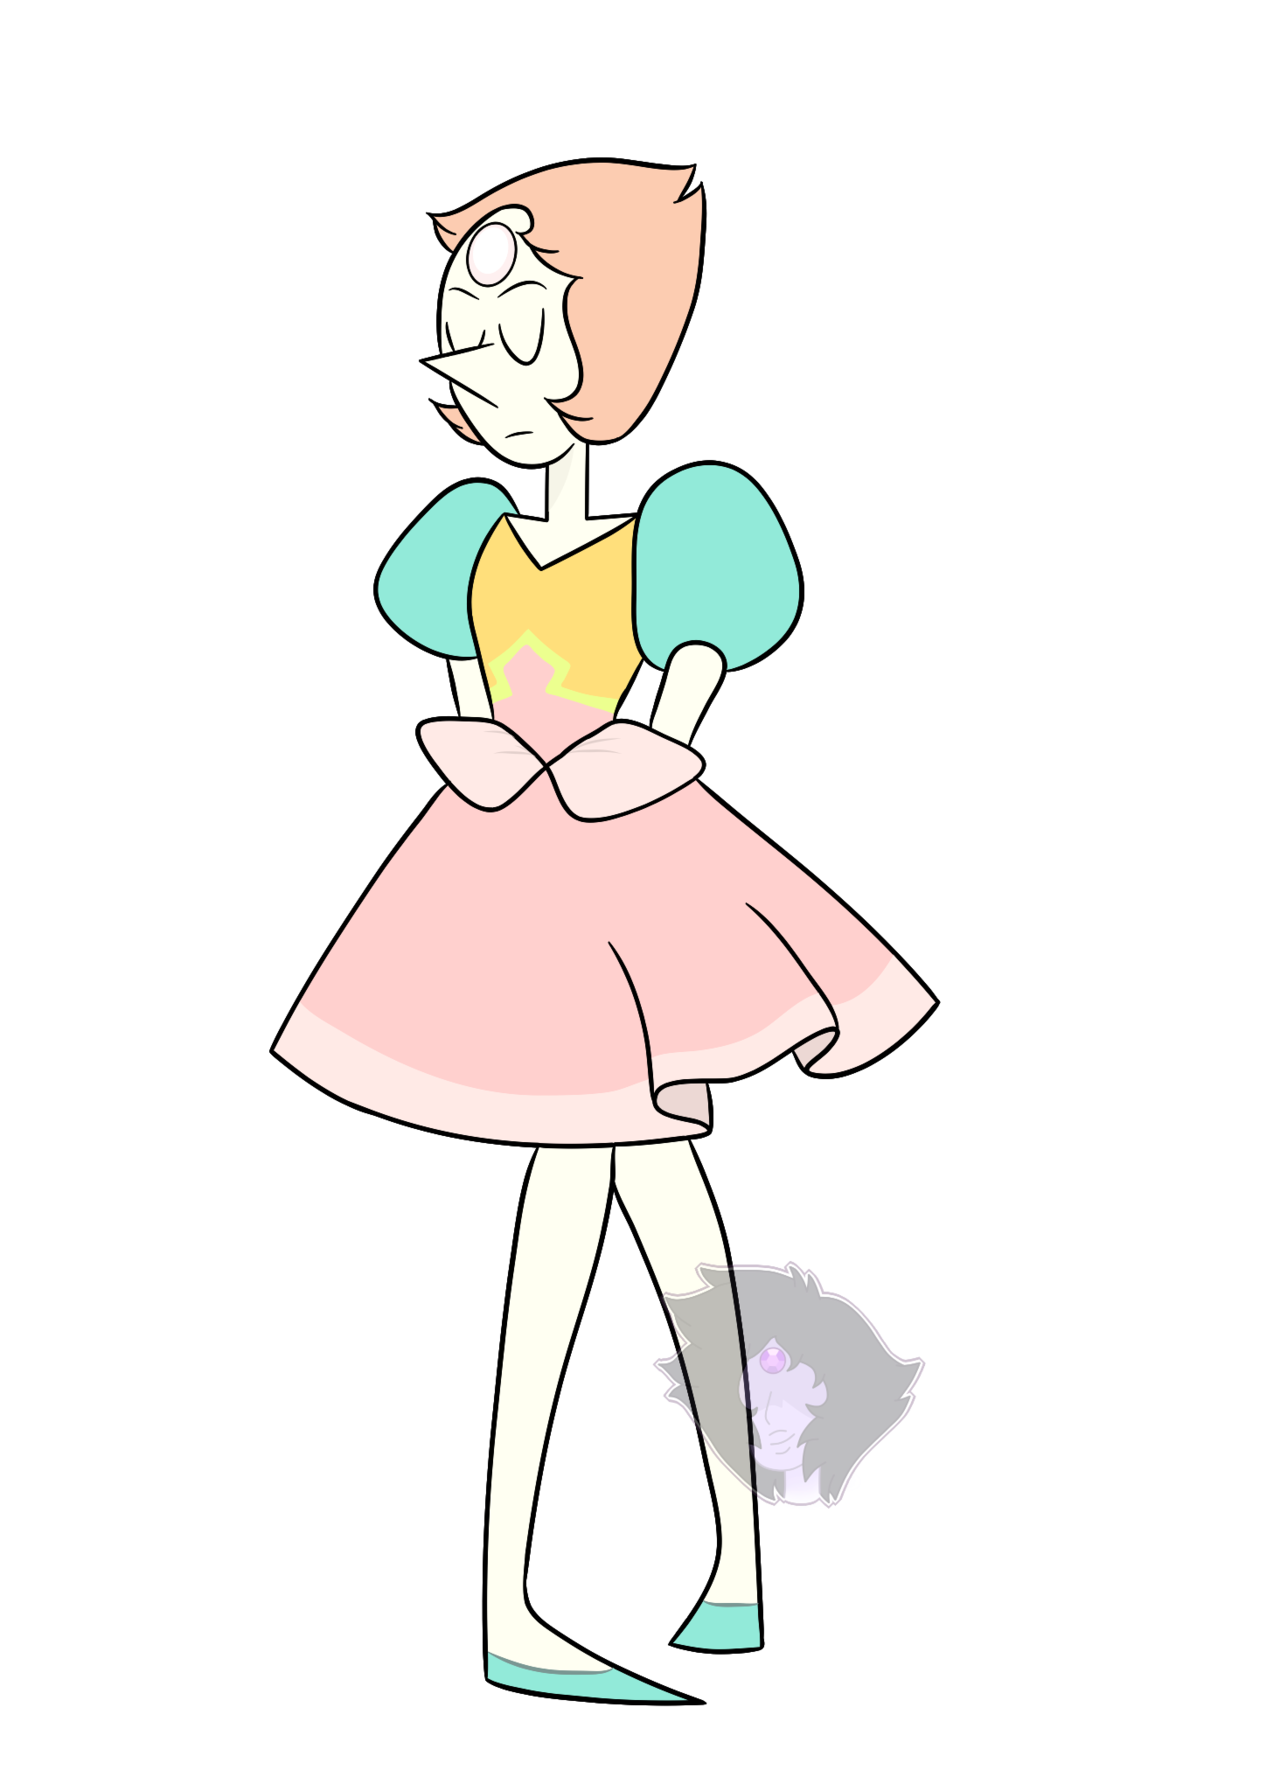 Am I late to the past Pearl party